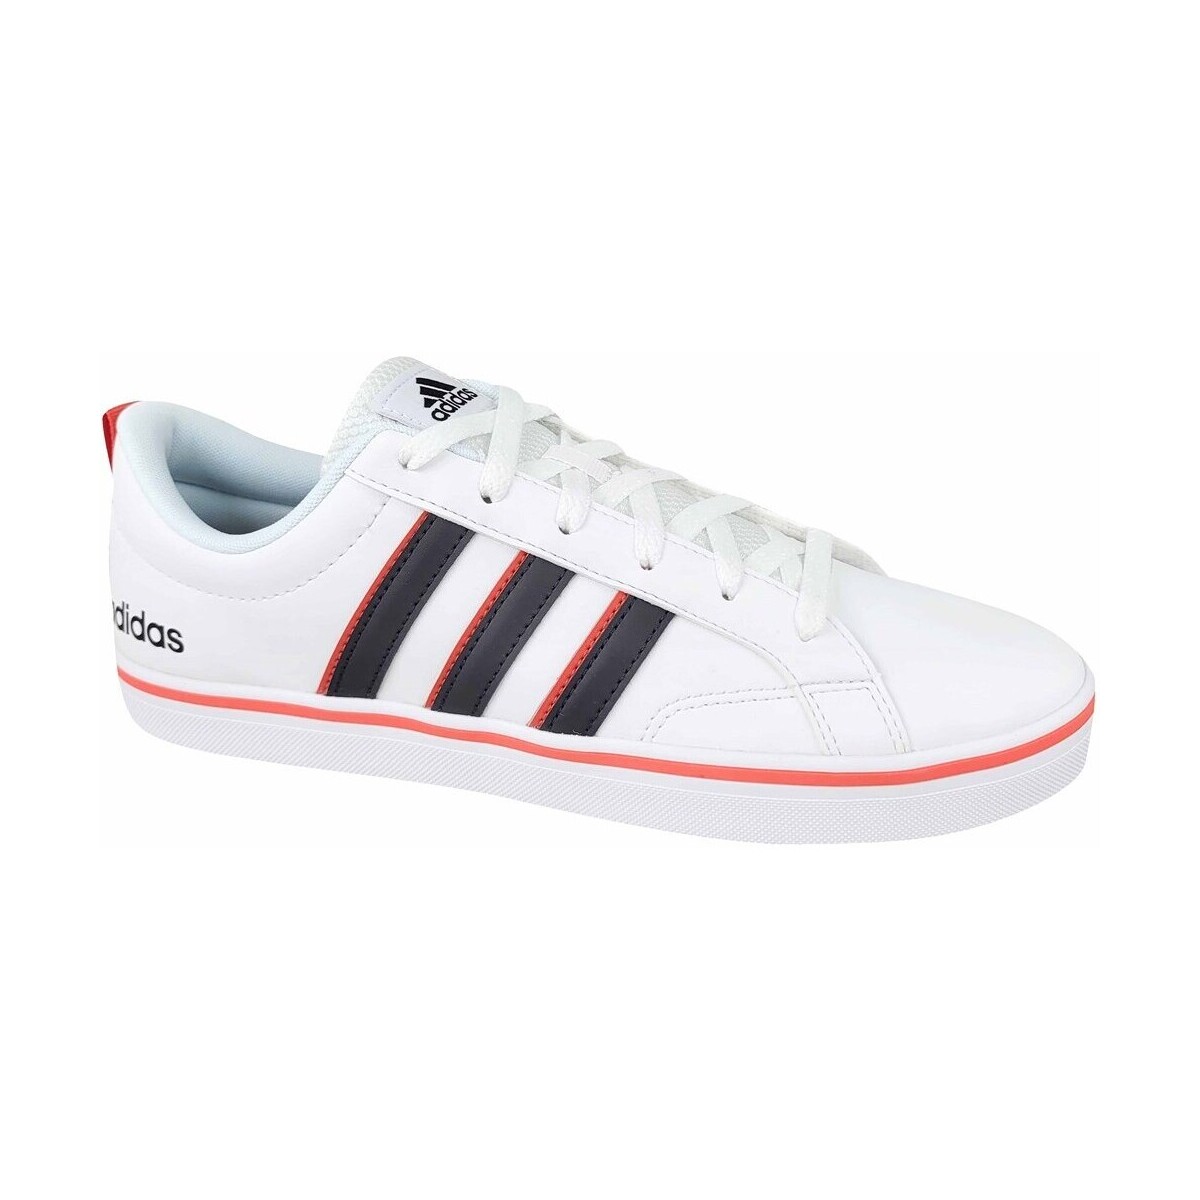 Adidas Pace 2.0 White